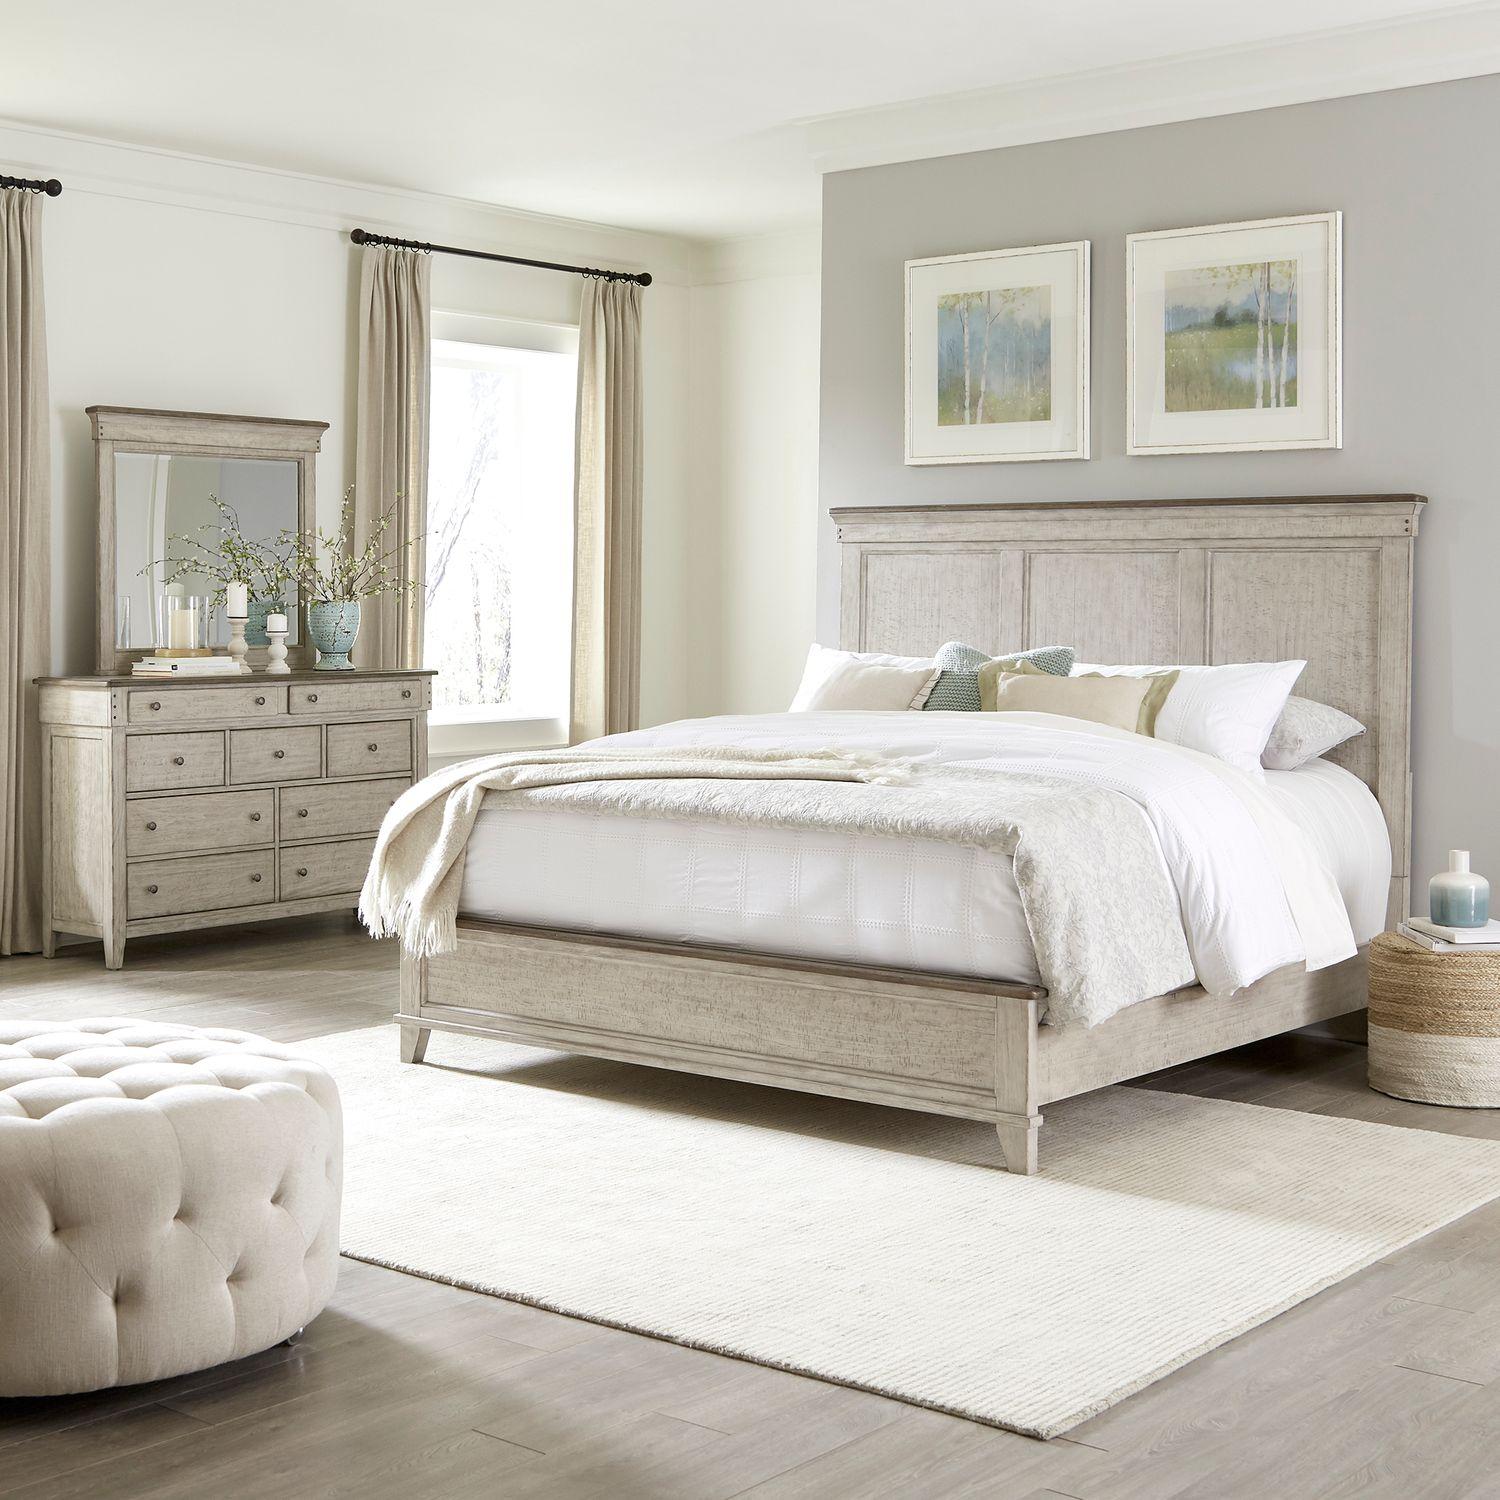 Contemporary, Cottage Panel Bedroom Set Ivy Hollow (457-BR) 457-BR-KPBDM in Taupe 